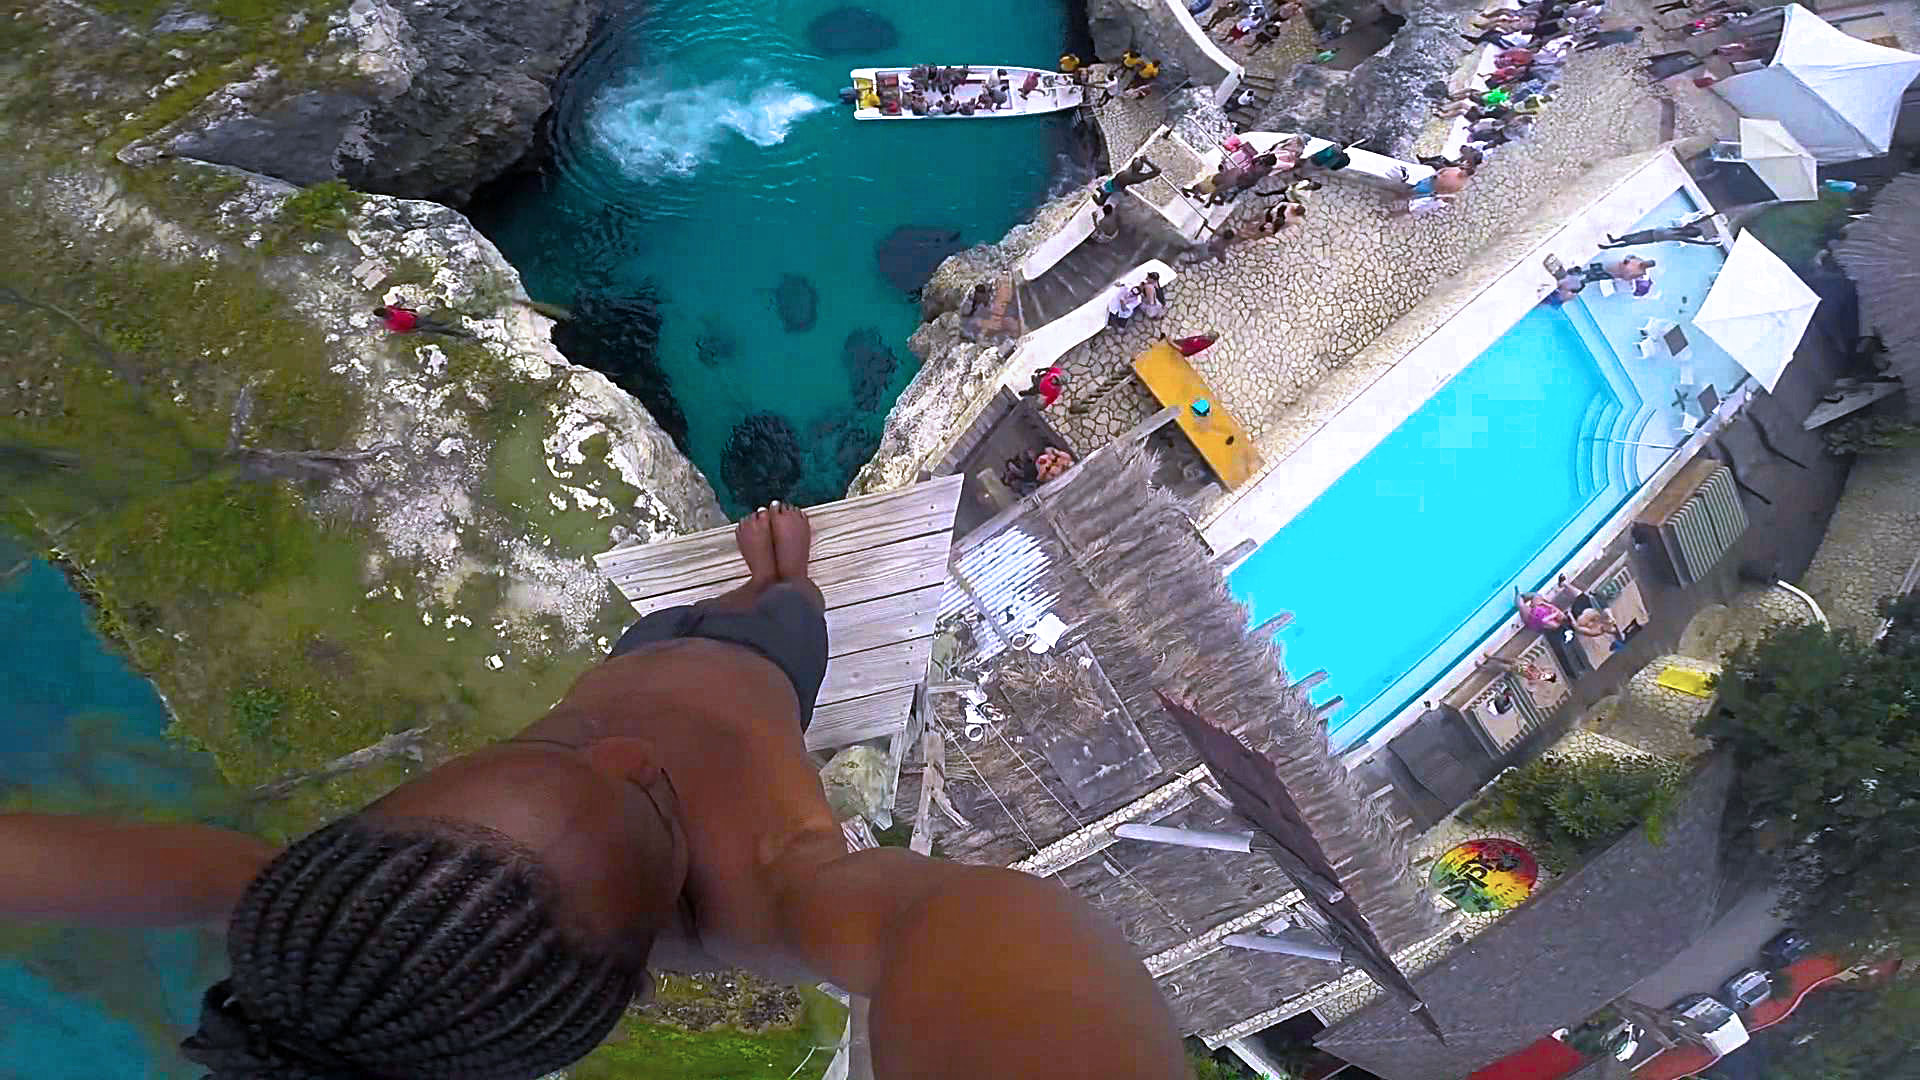 Rick's Cafe Jamaica Cliff Diving